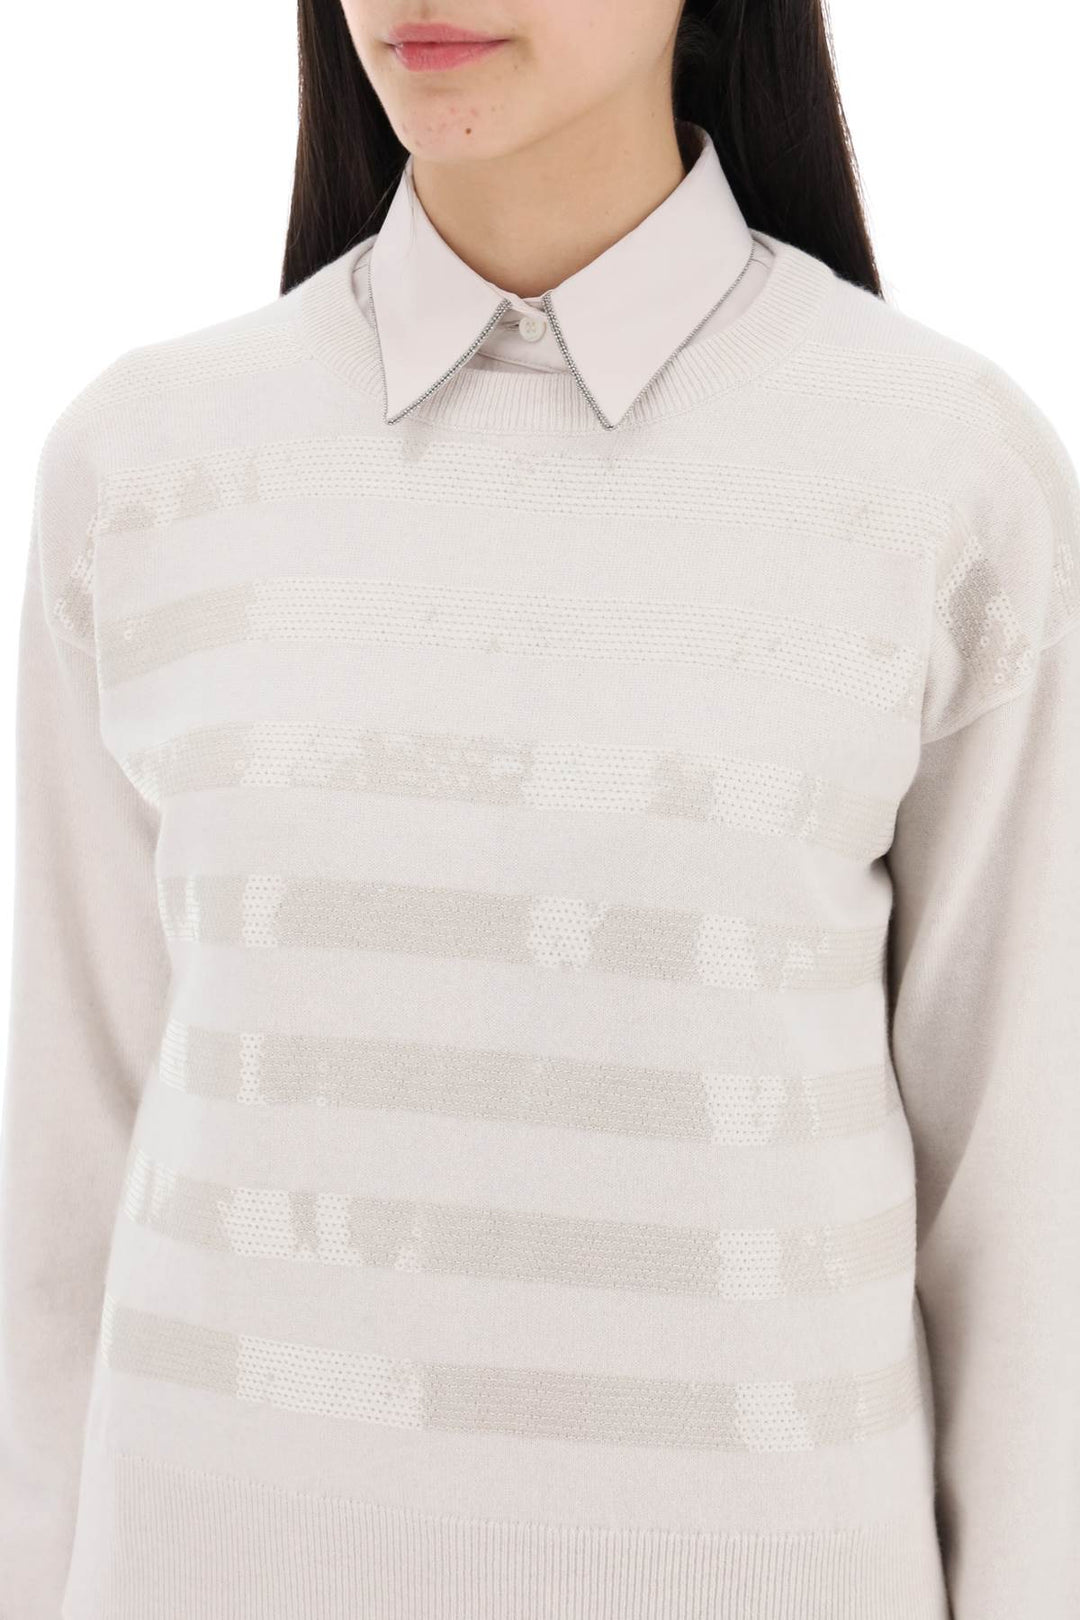 Brunello Cucinelli Replace With Double Quotecashmere Dazzling Stripe   Bianco